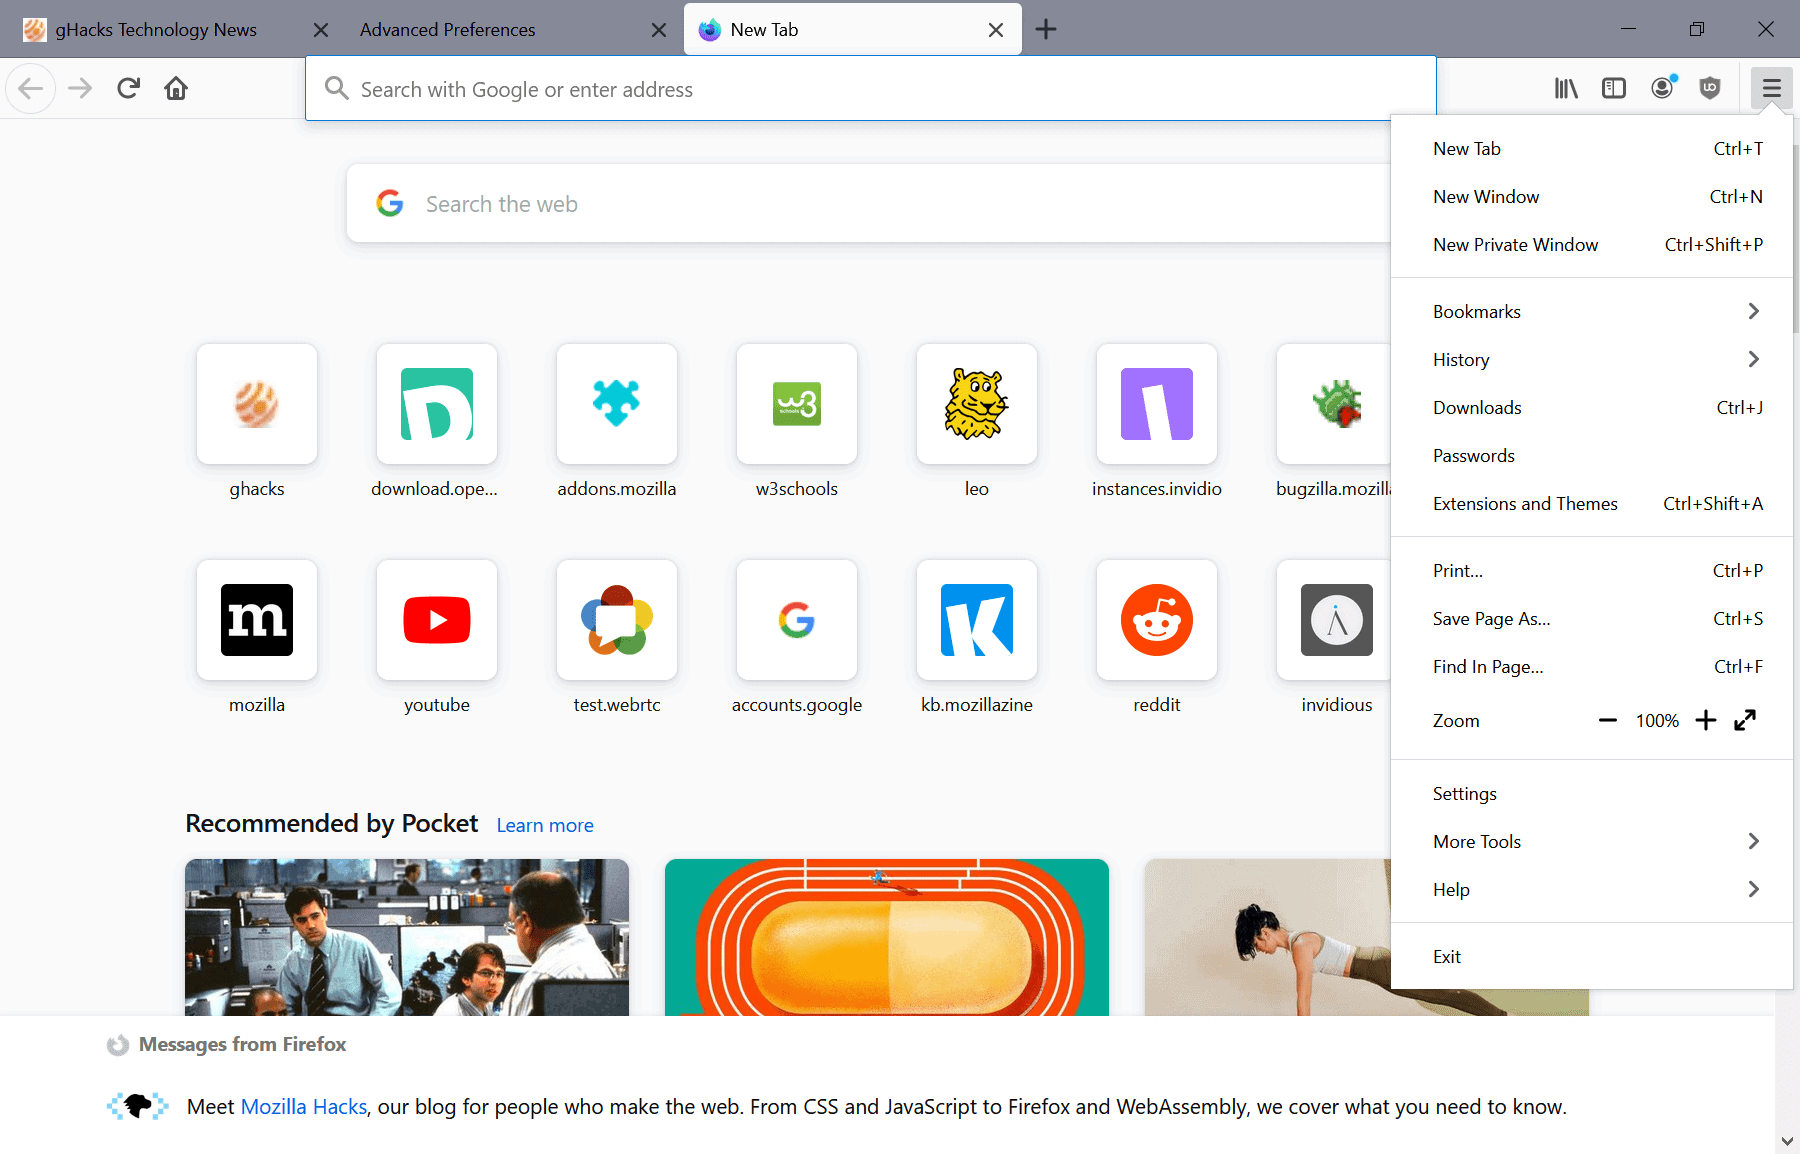 Another glimpse at Firefox's upcoming Proton design refresh: the new menu